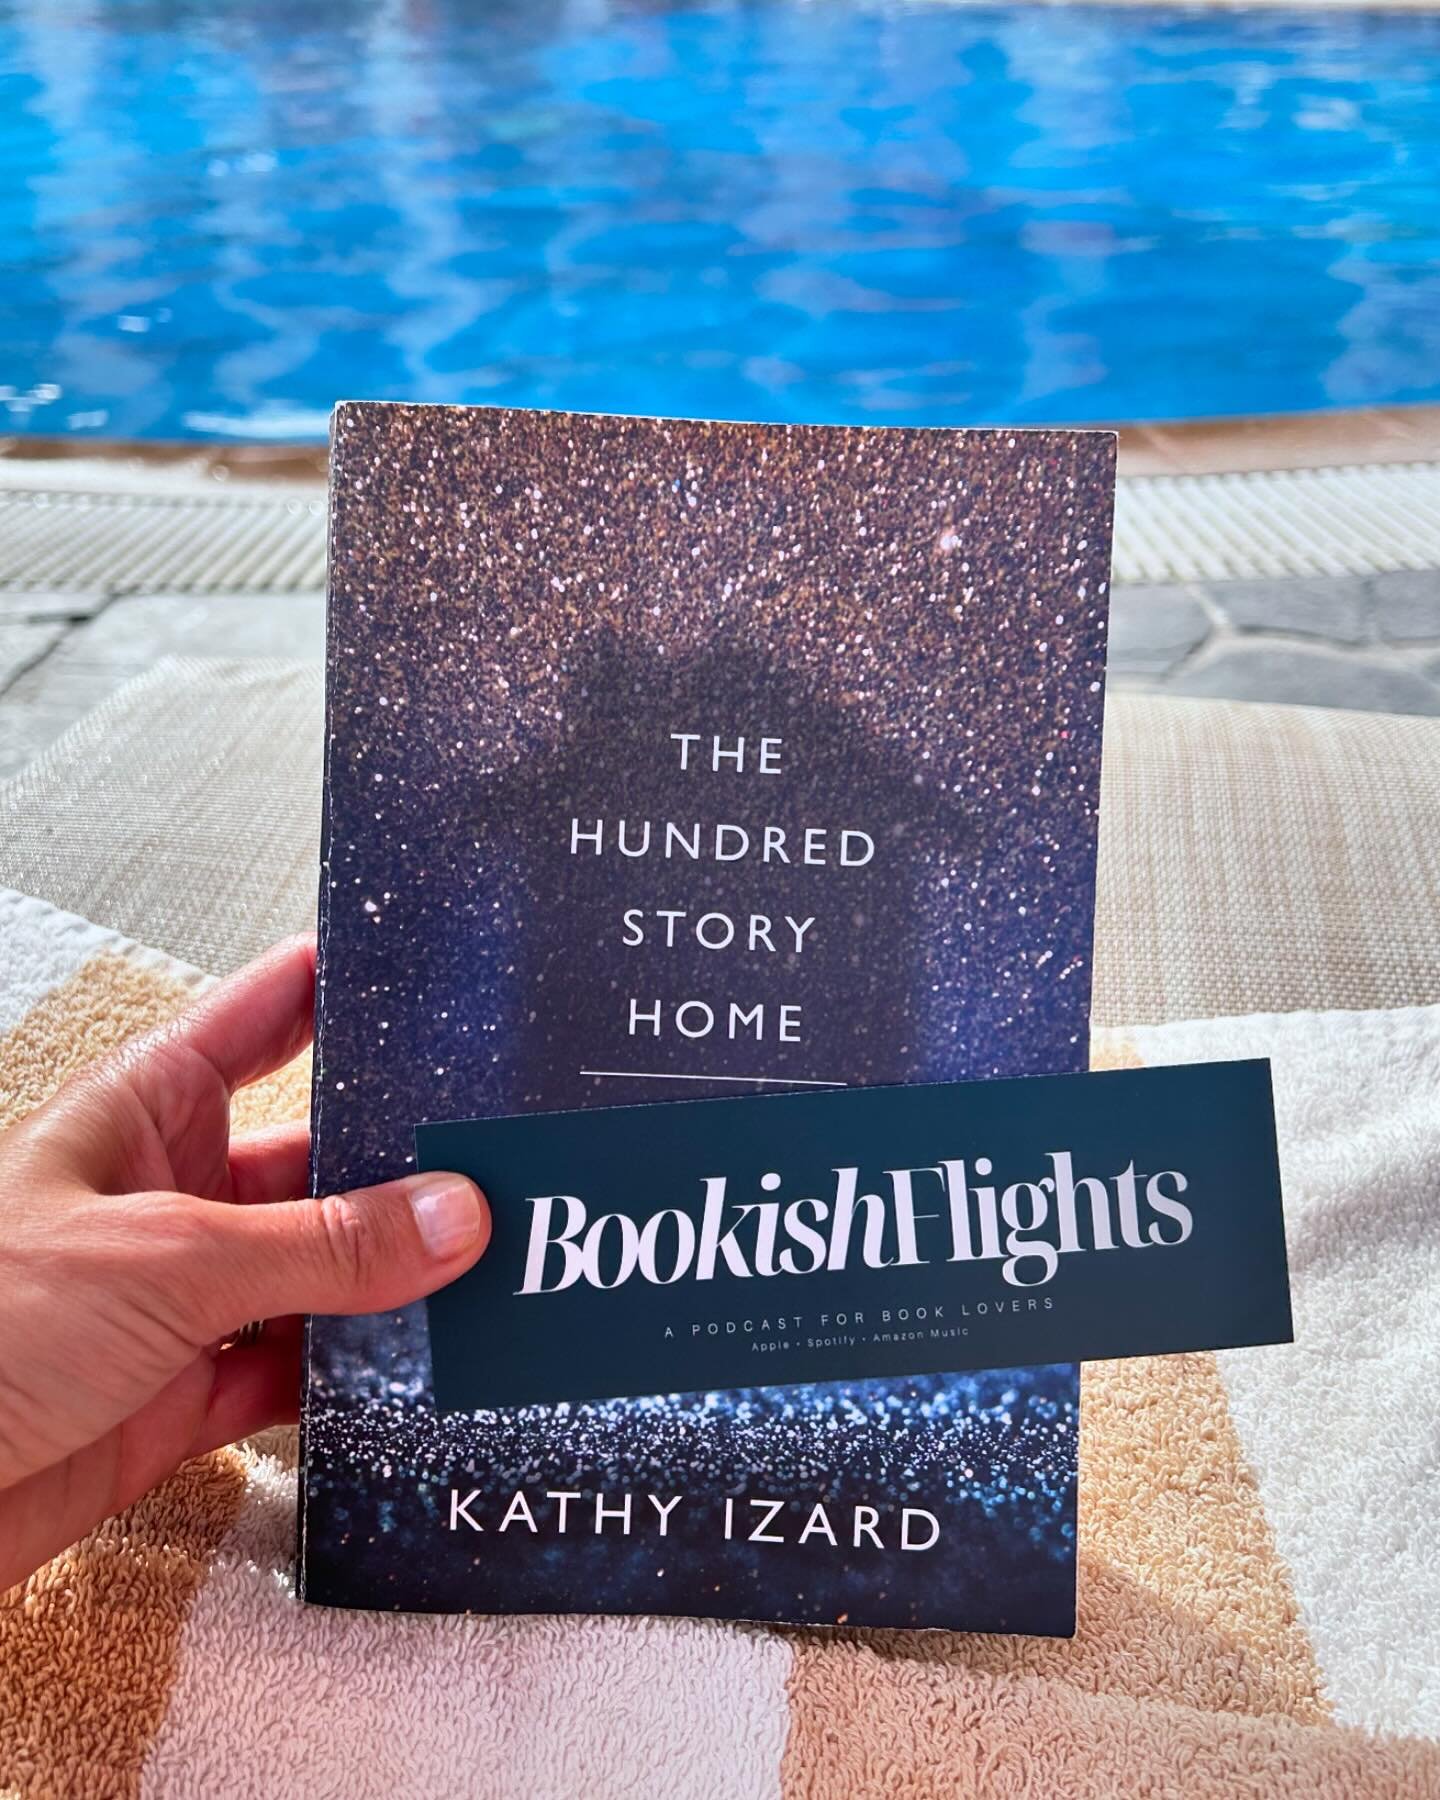 I wish I could give this book more than 5 stars. What an amazing memoir by Kathy Izard! Coincidentally, she launched her podcast today, Trust the Whisper. Congratulations Kathy! 

I love books that make me feel (I cried so many times while reading be